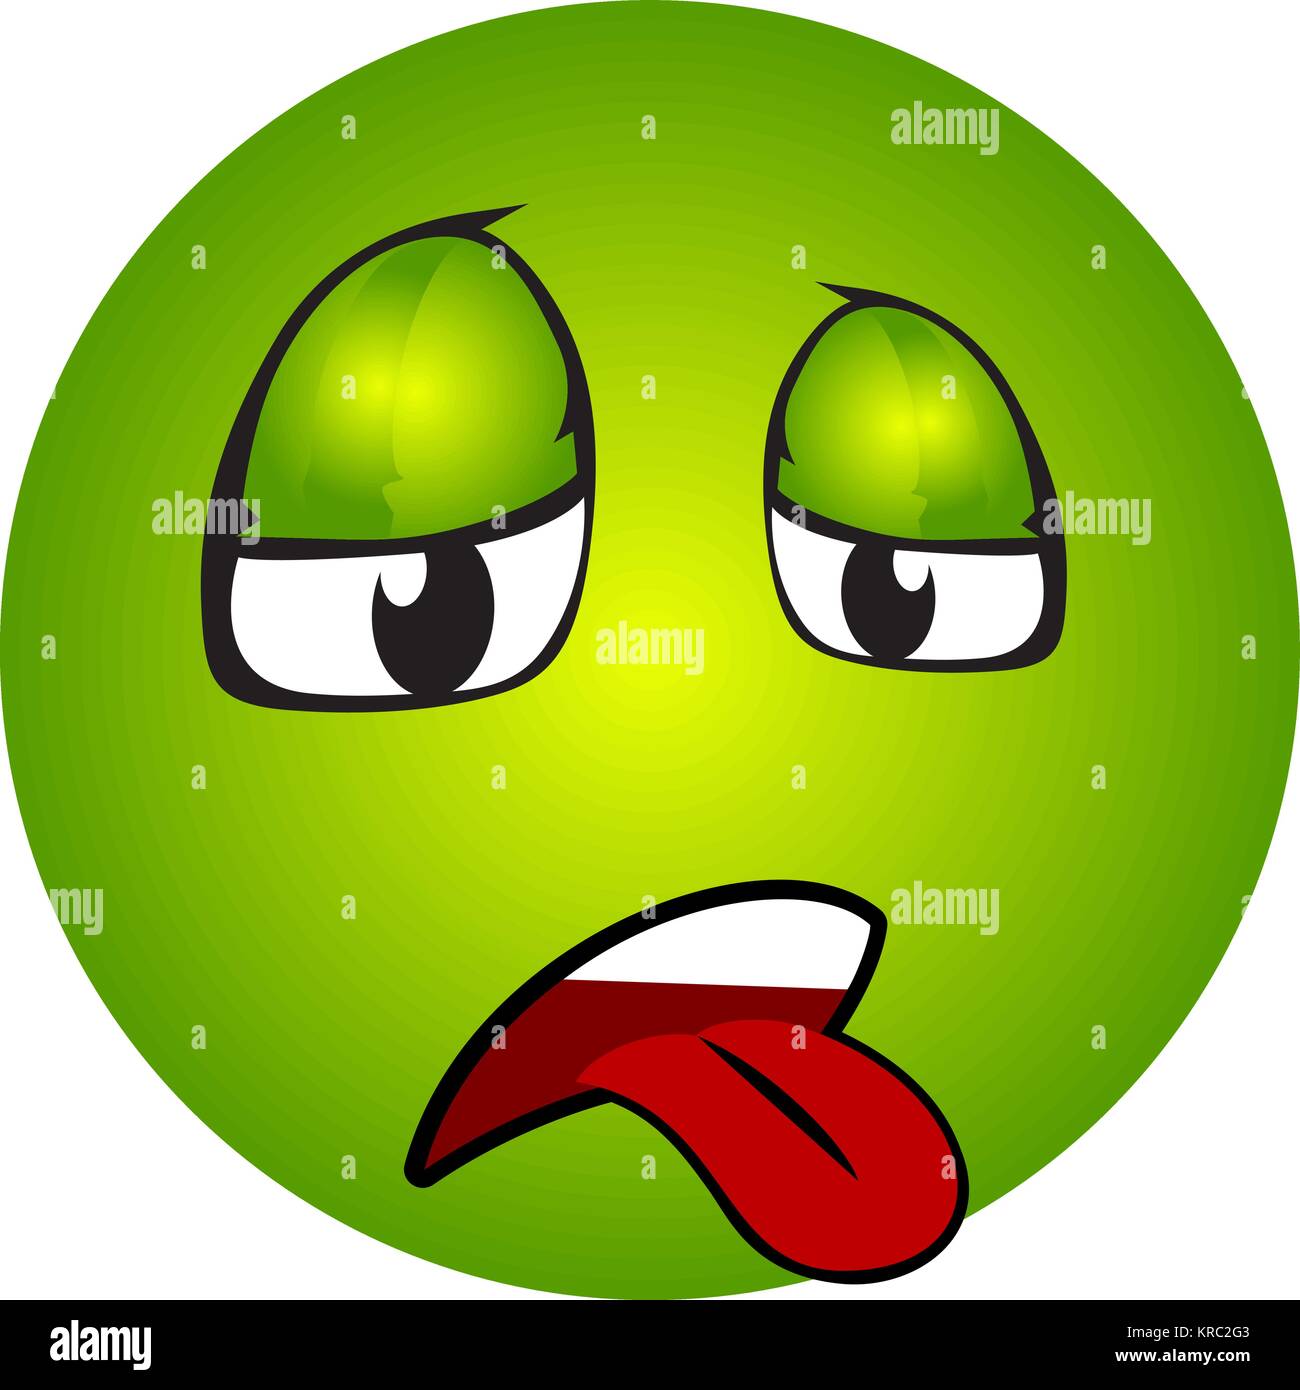 Sick emoticon with tongue out Stock Vector